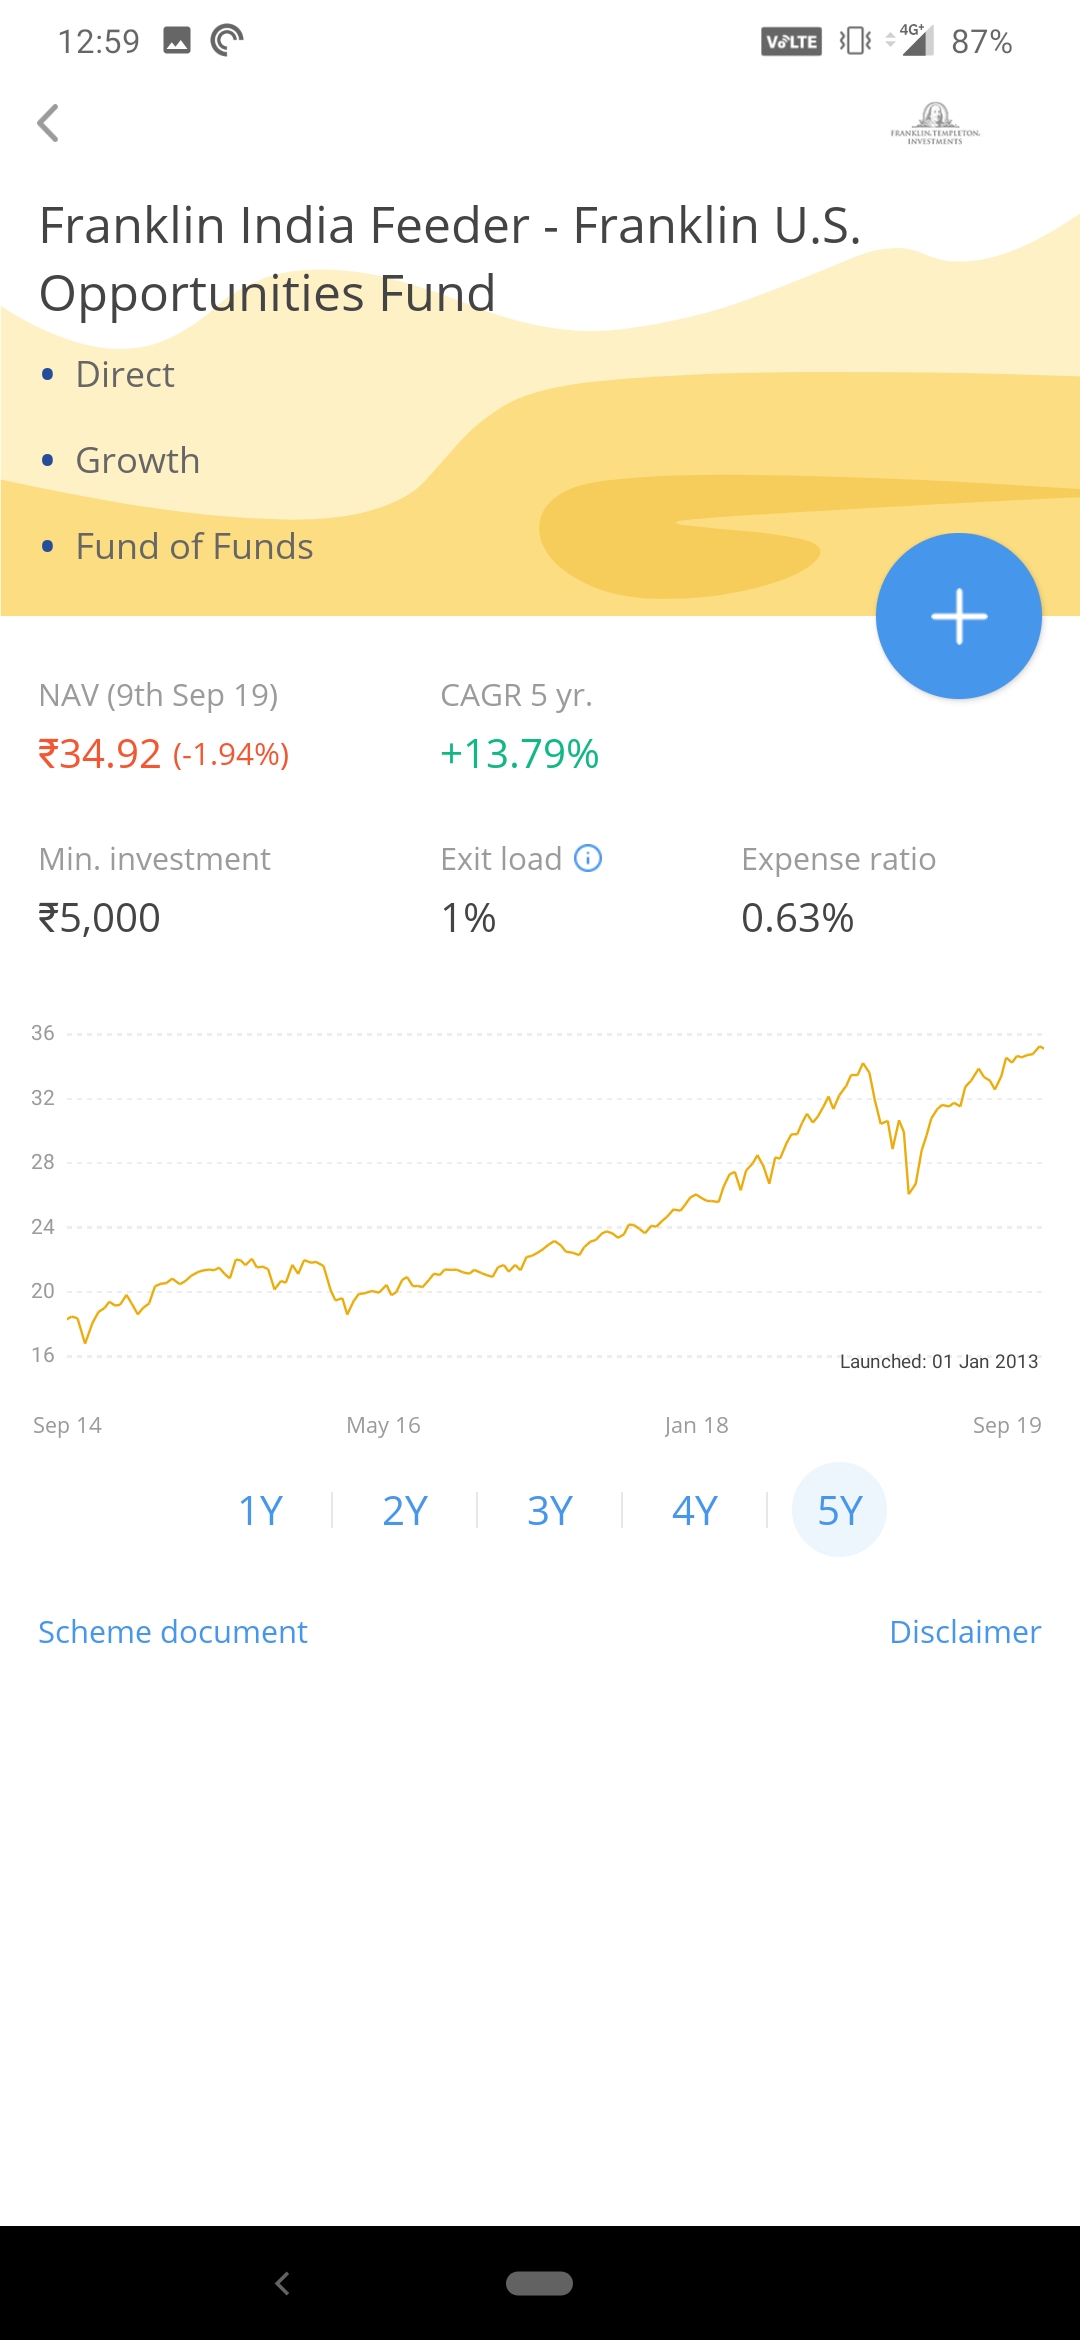 Zerodha Vs Paytm Money Broker Comparison | which one is better | Reviews, Brokerage, AMC charges